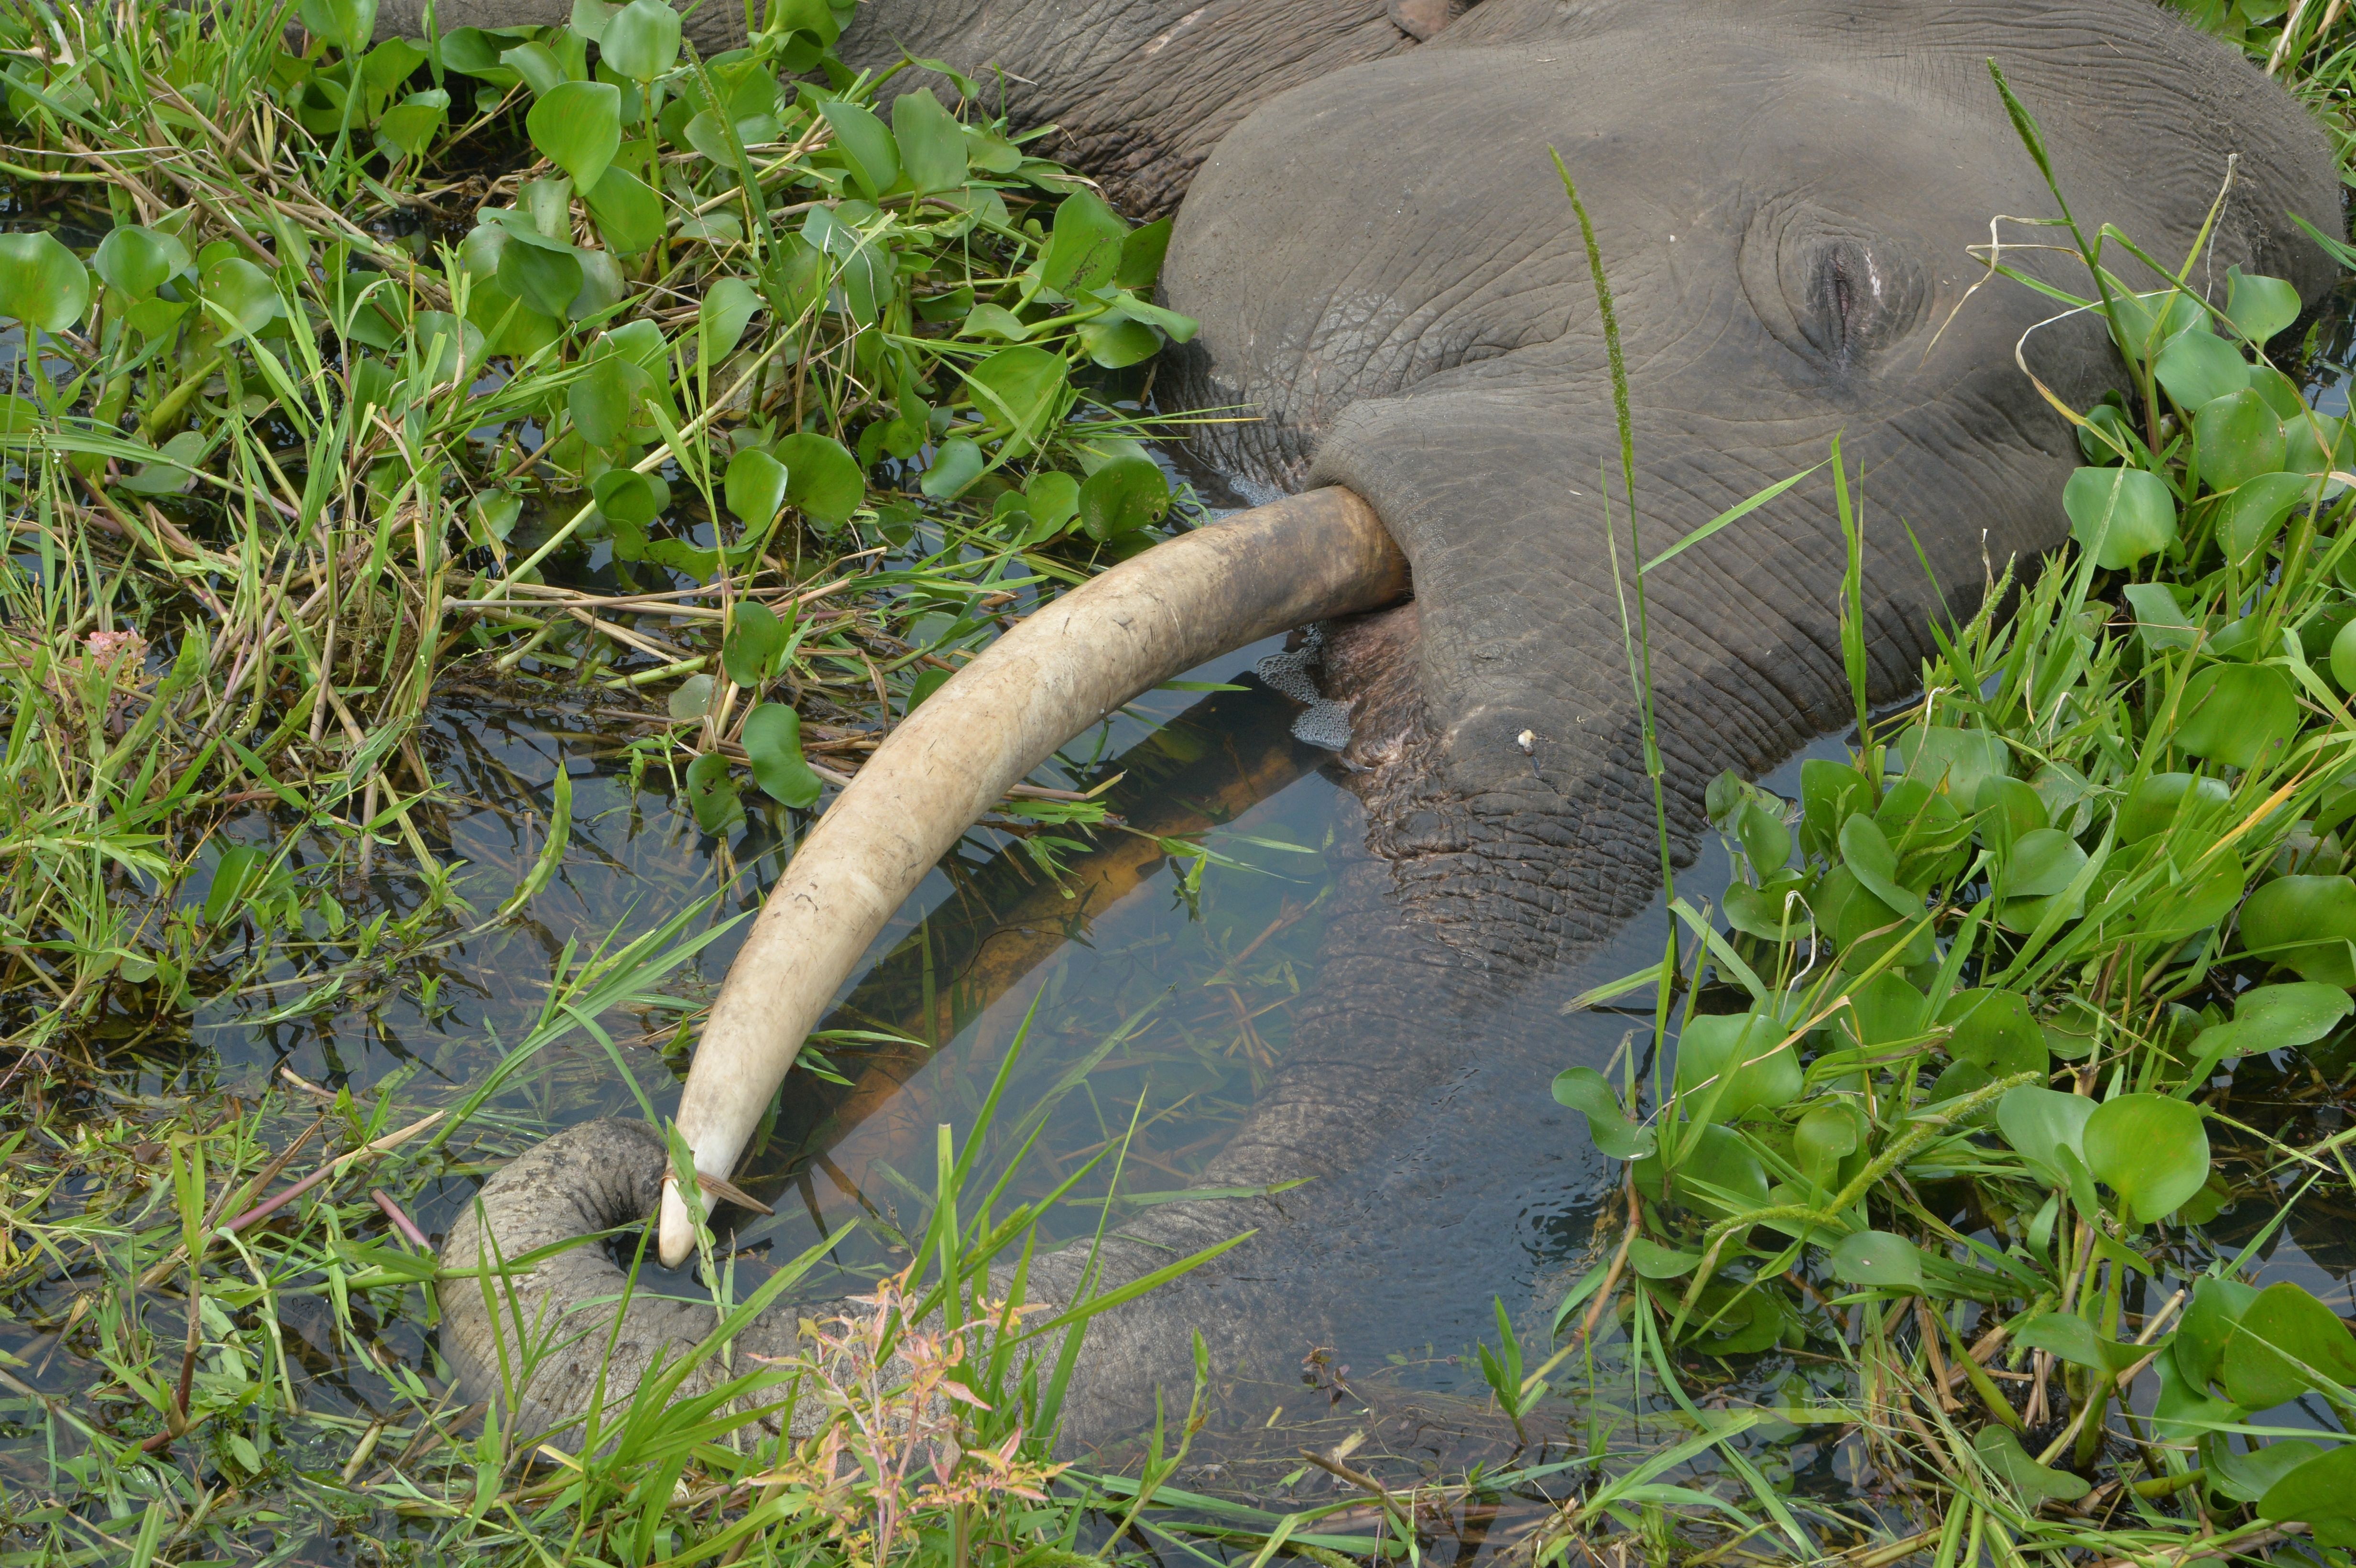 File photo: An elephant found dead in a field in West Bengal, India, on 19 October, 2019, with electrocution suspected as cause of death